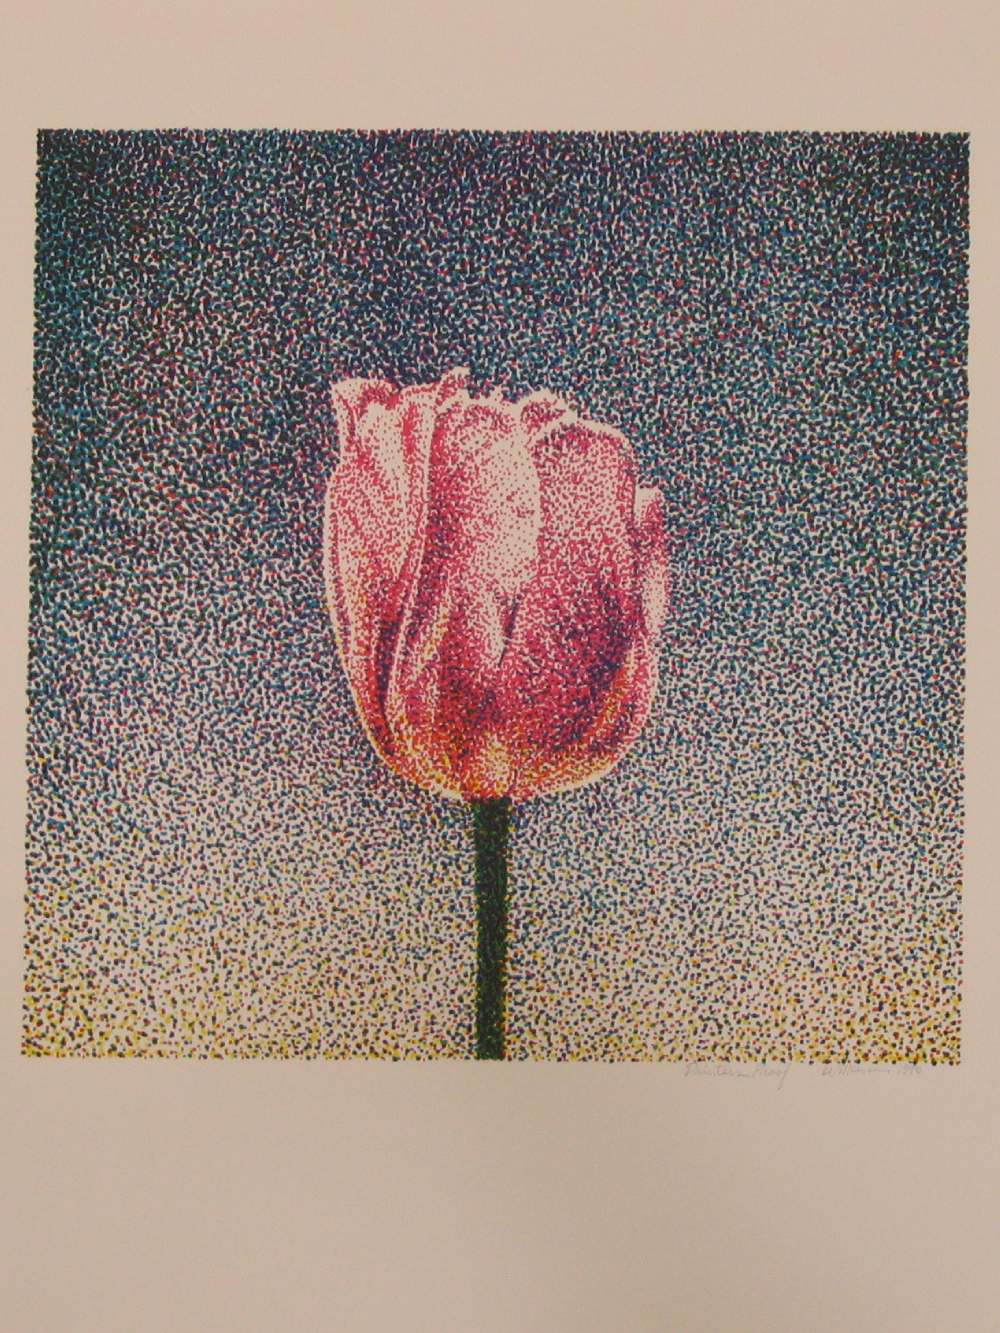 Tulip 20x20 serigraph by Jerry Wilkerson 1990